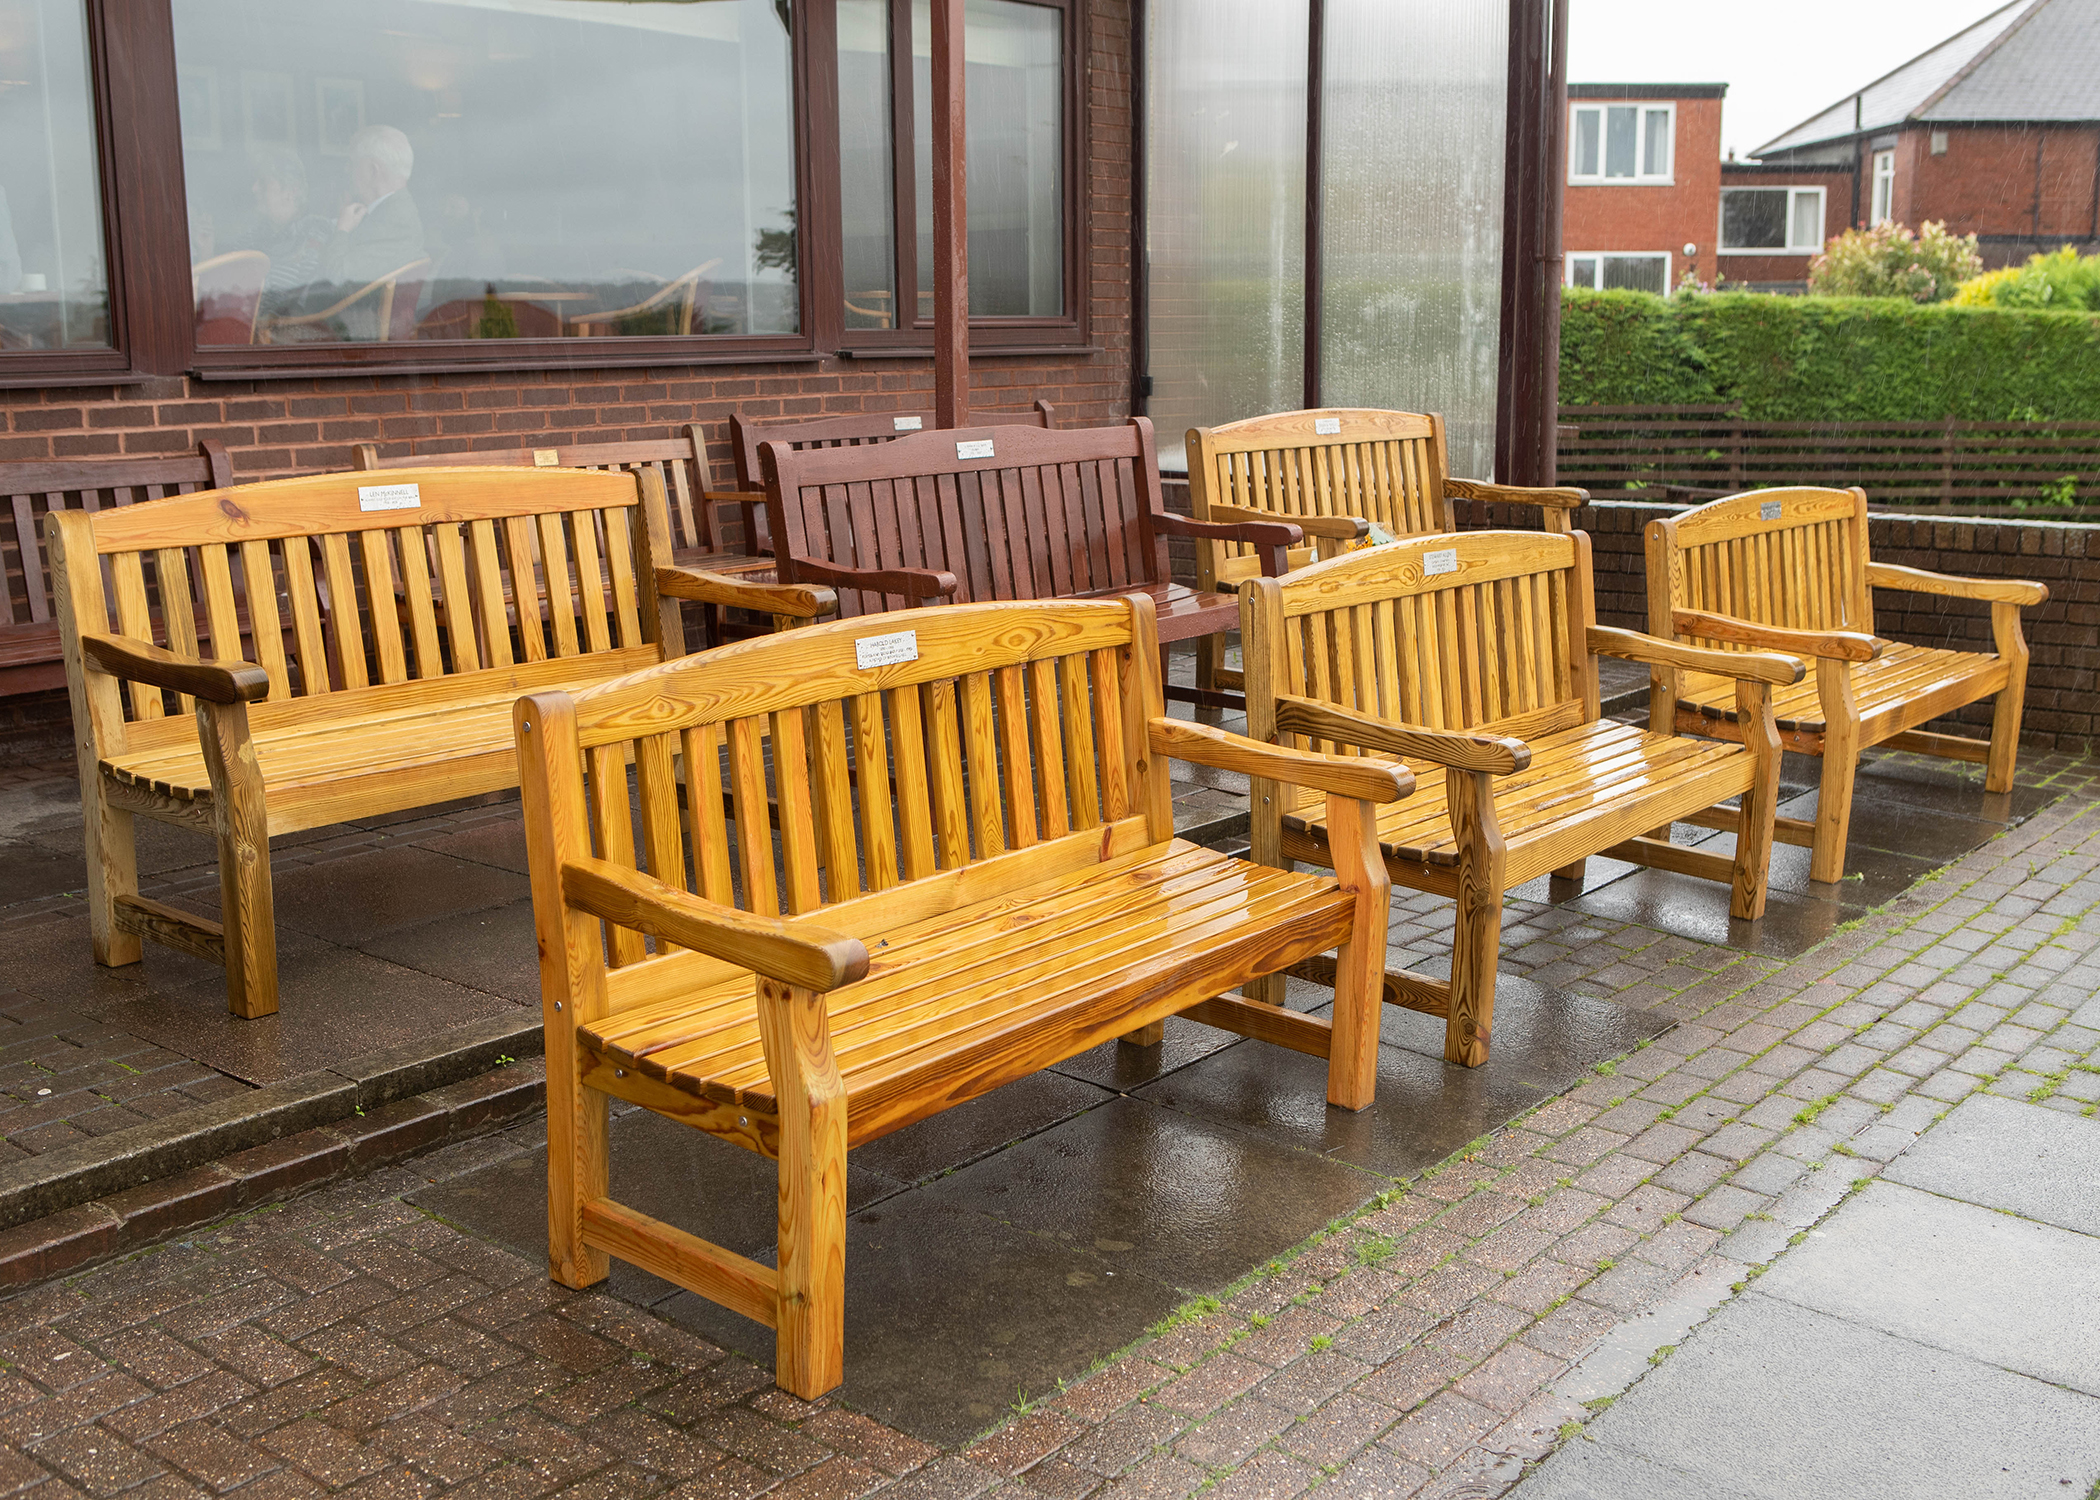 New benches commemorate the contributions of Stewart Allen, Harold Lakey, Lenny McKinnell, Fenwick Marley and Bill Watts